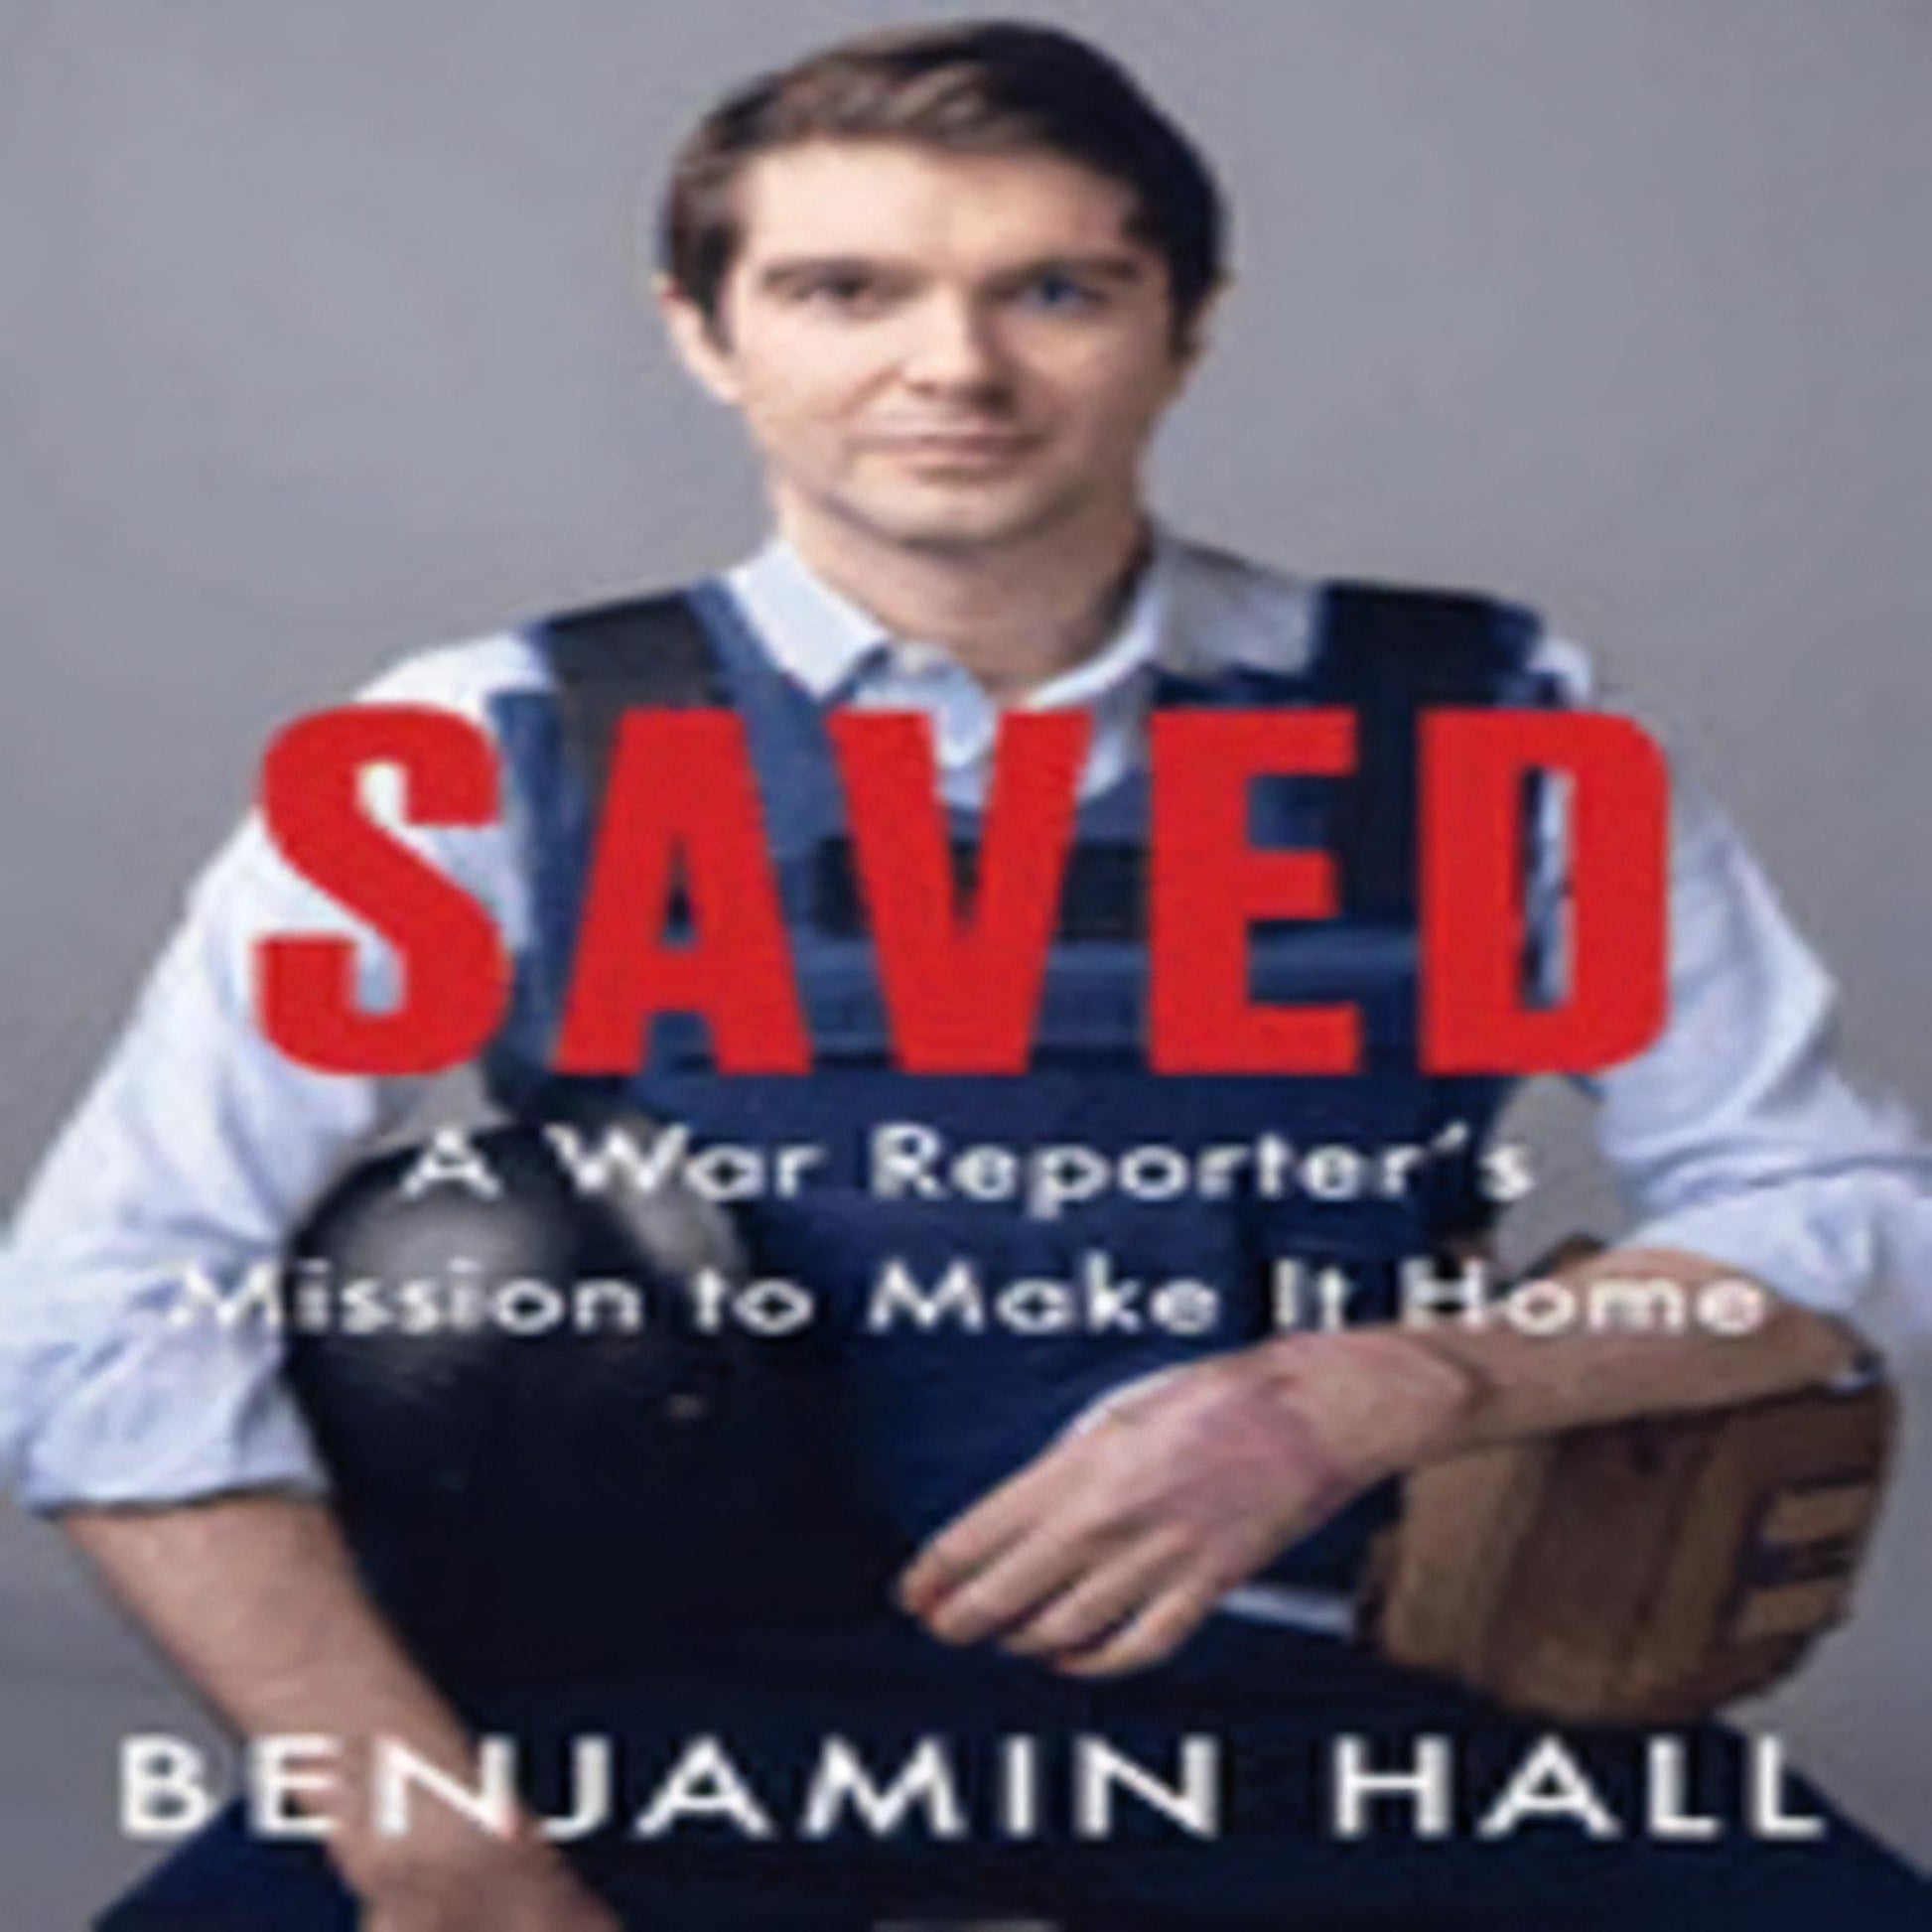 Saved: A War Reporter's Mission to Make It Home736-050623-9780063309661DPGBOOKSTORE.COM. Today's Bestsellers.